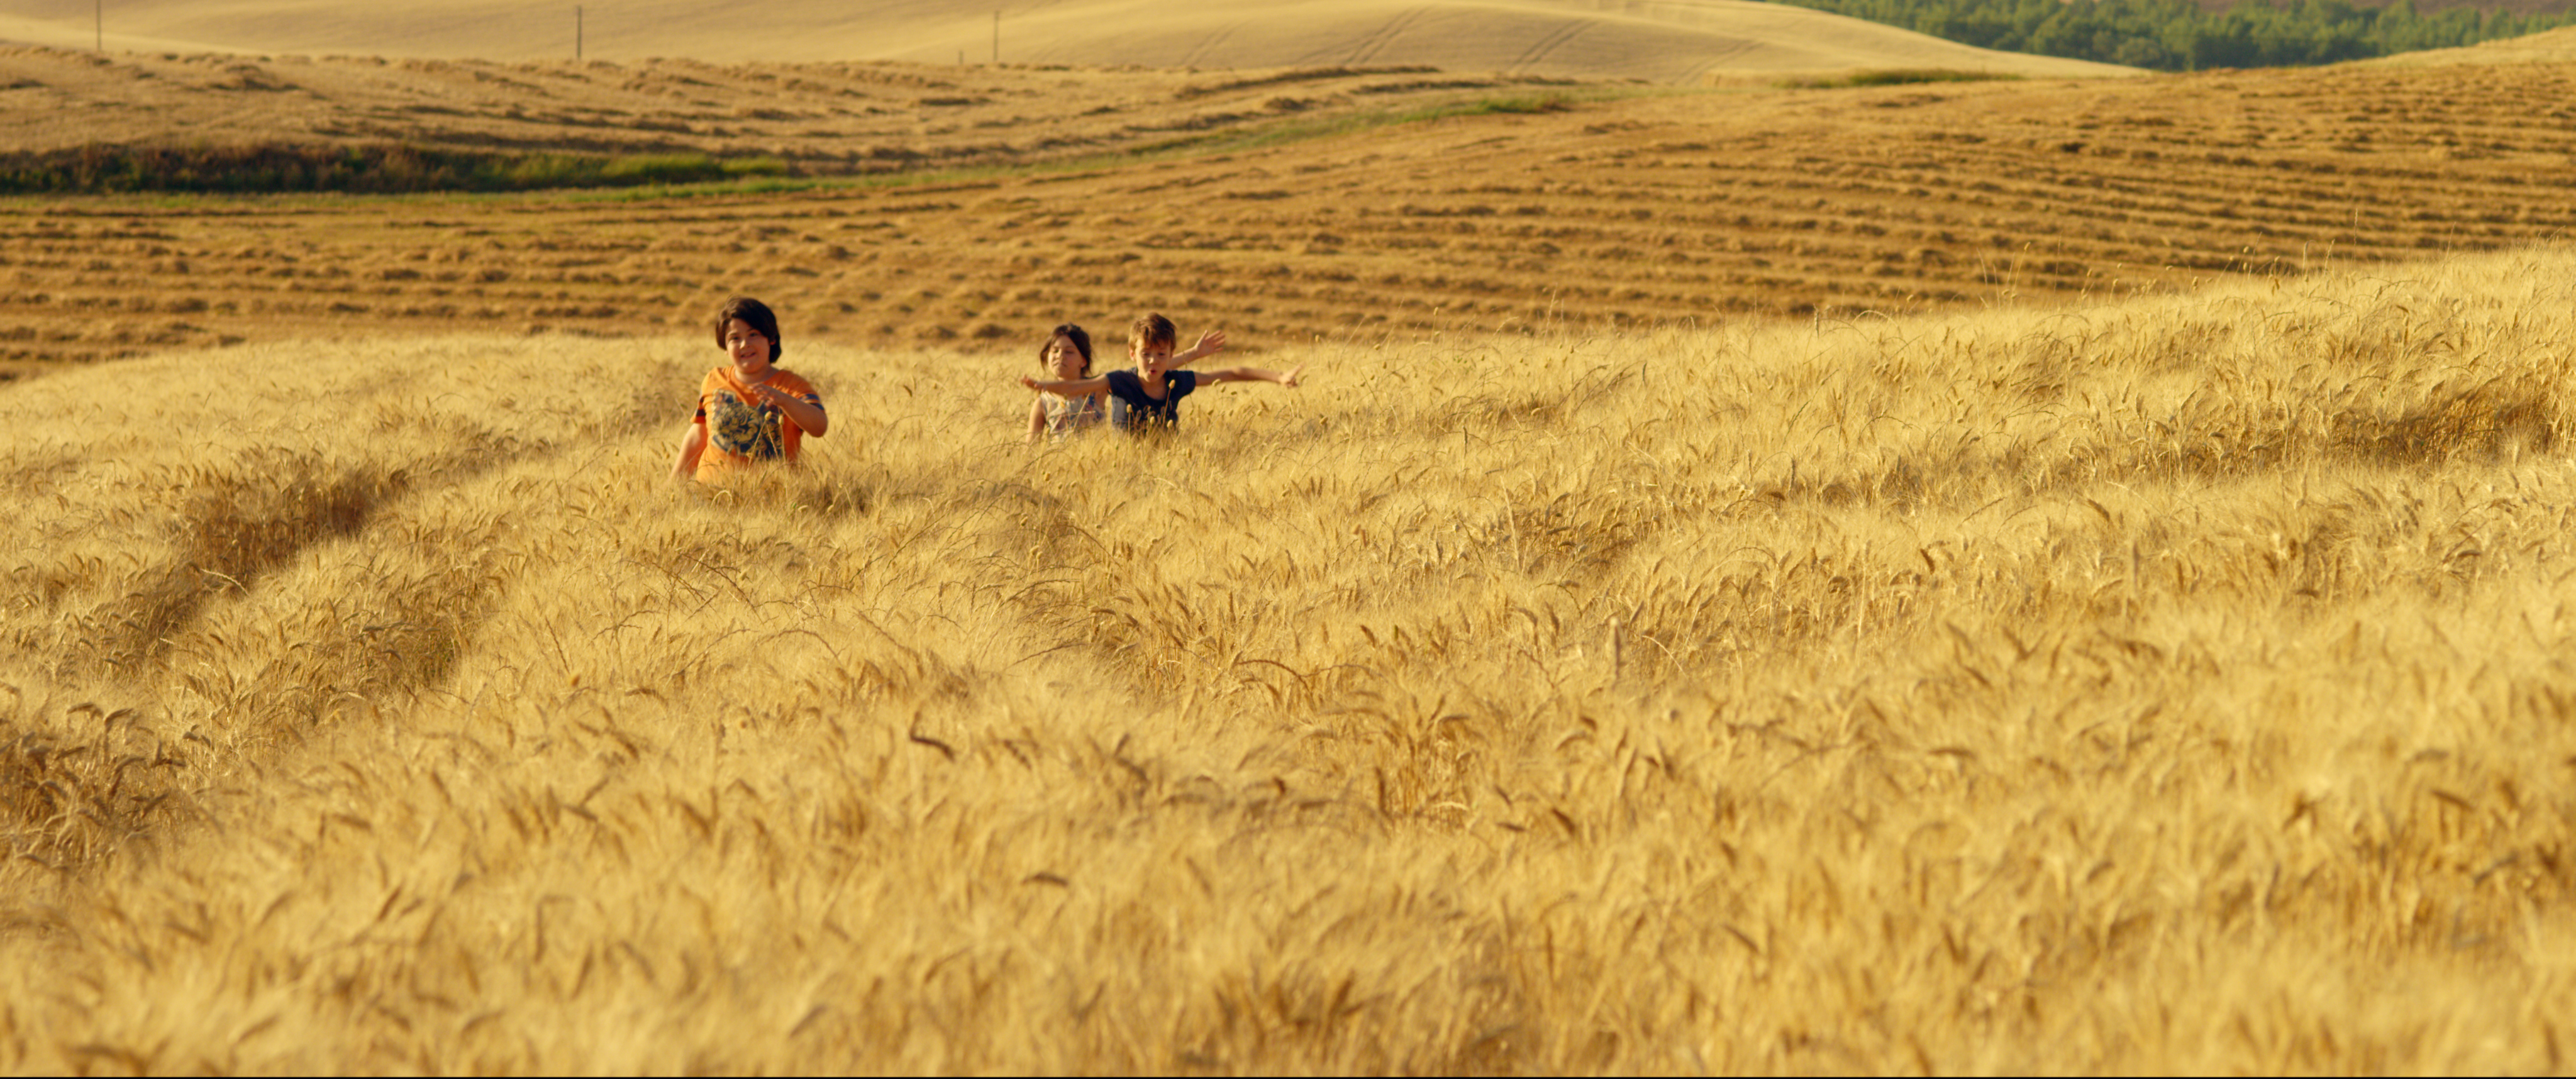 SEA OF WHEAT – LOST IN A TUSCAN TALE